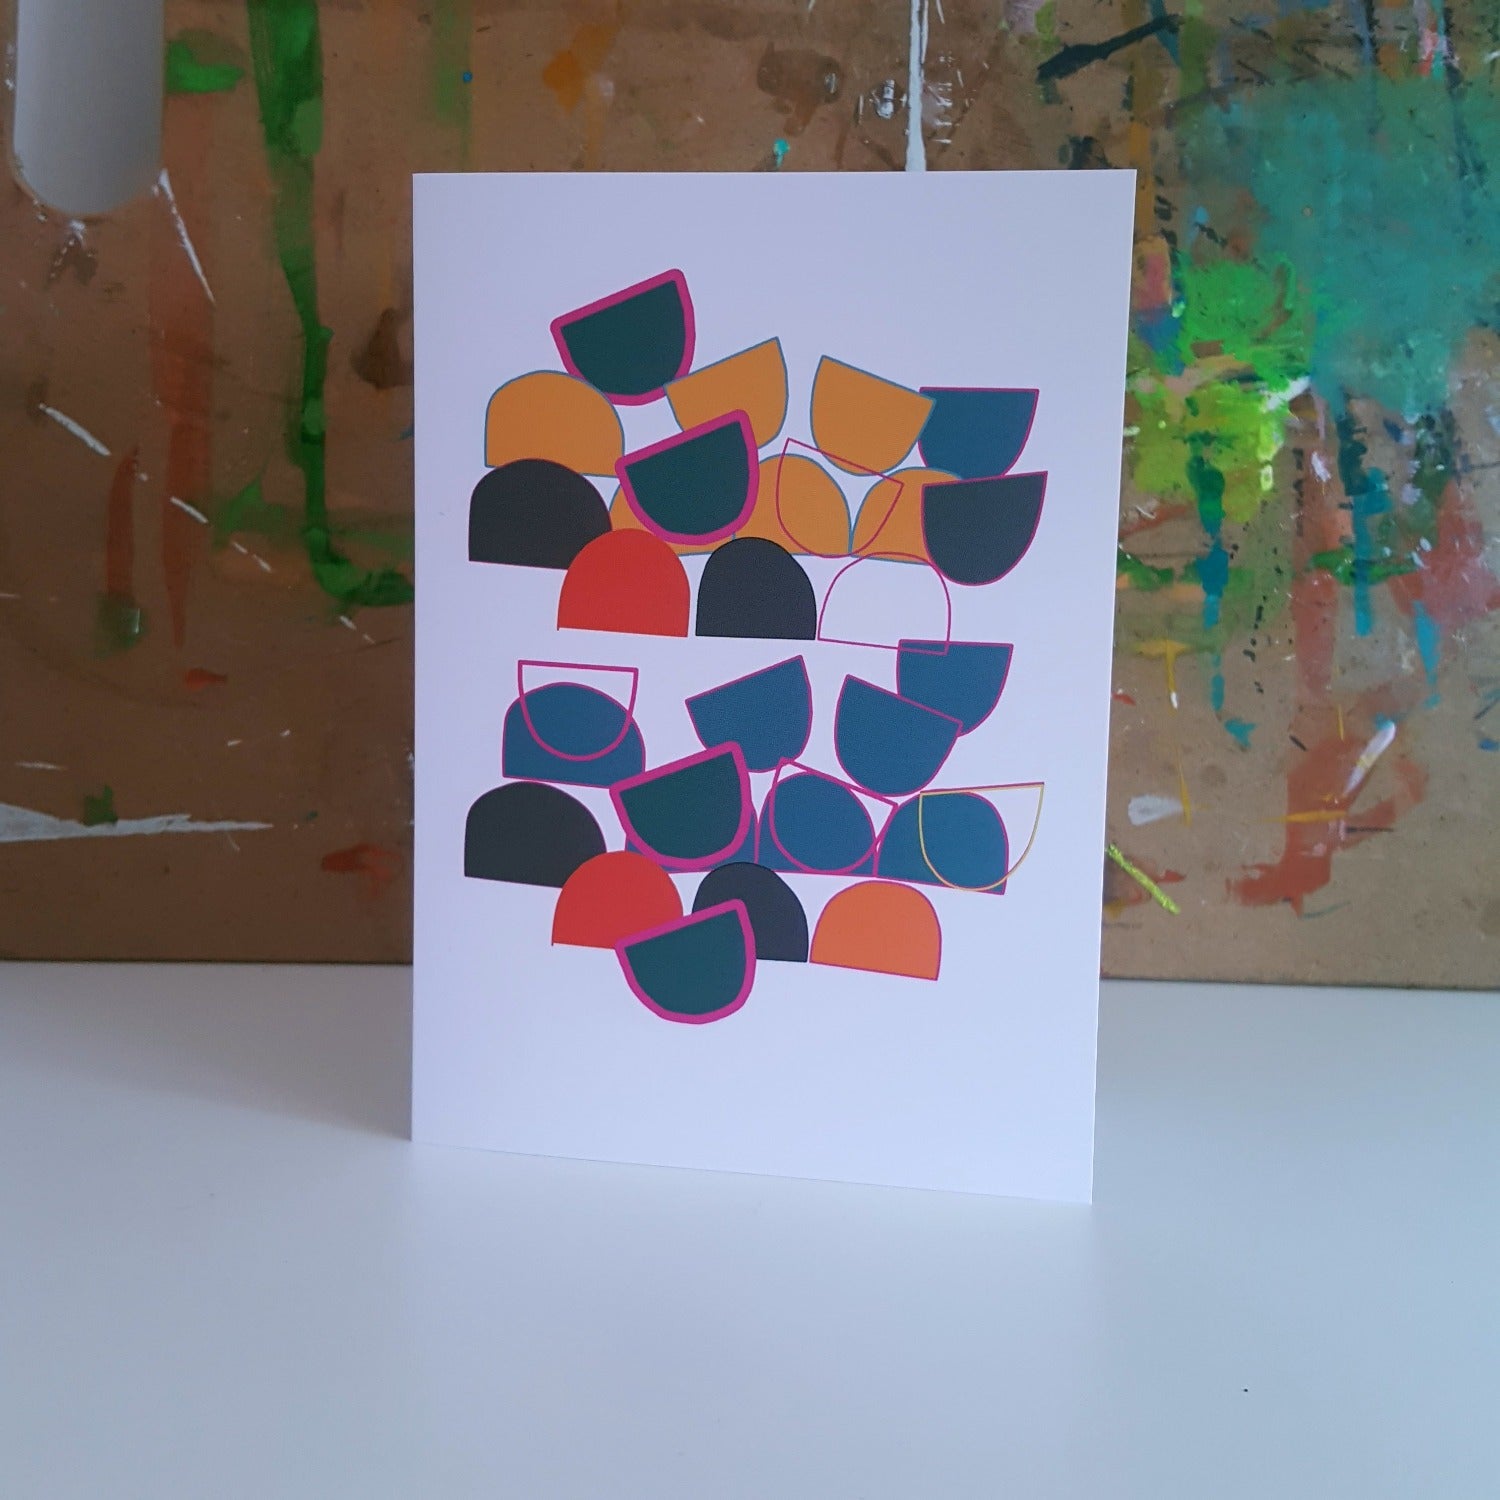 Creels design greeting card by Julia Laing.